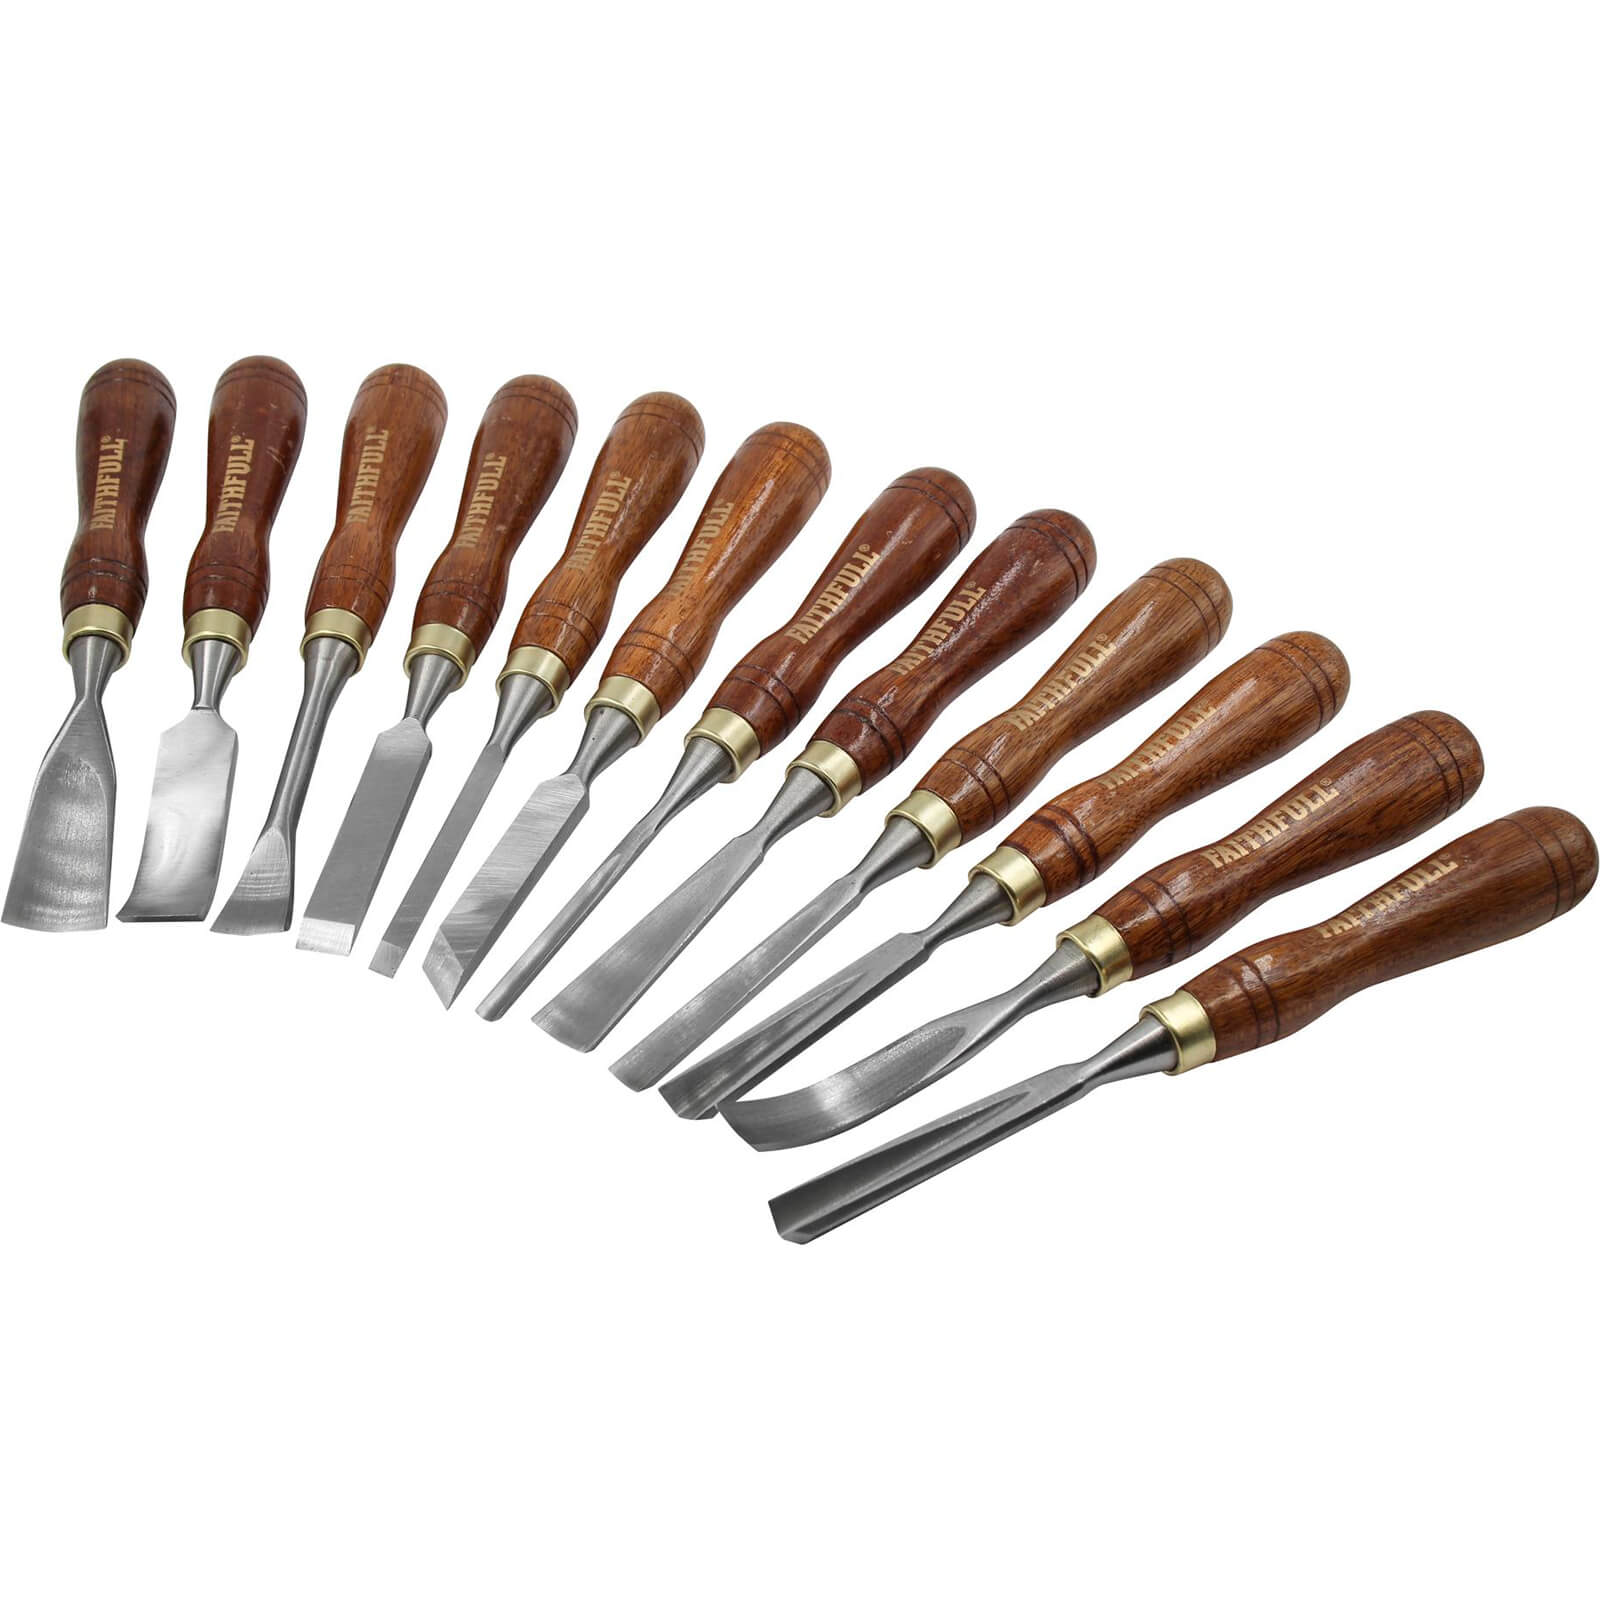 Faithfull 12 Piece Woodcarving Set In Case